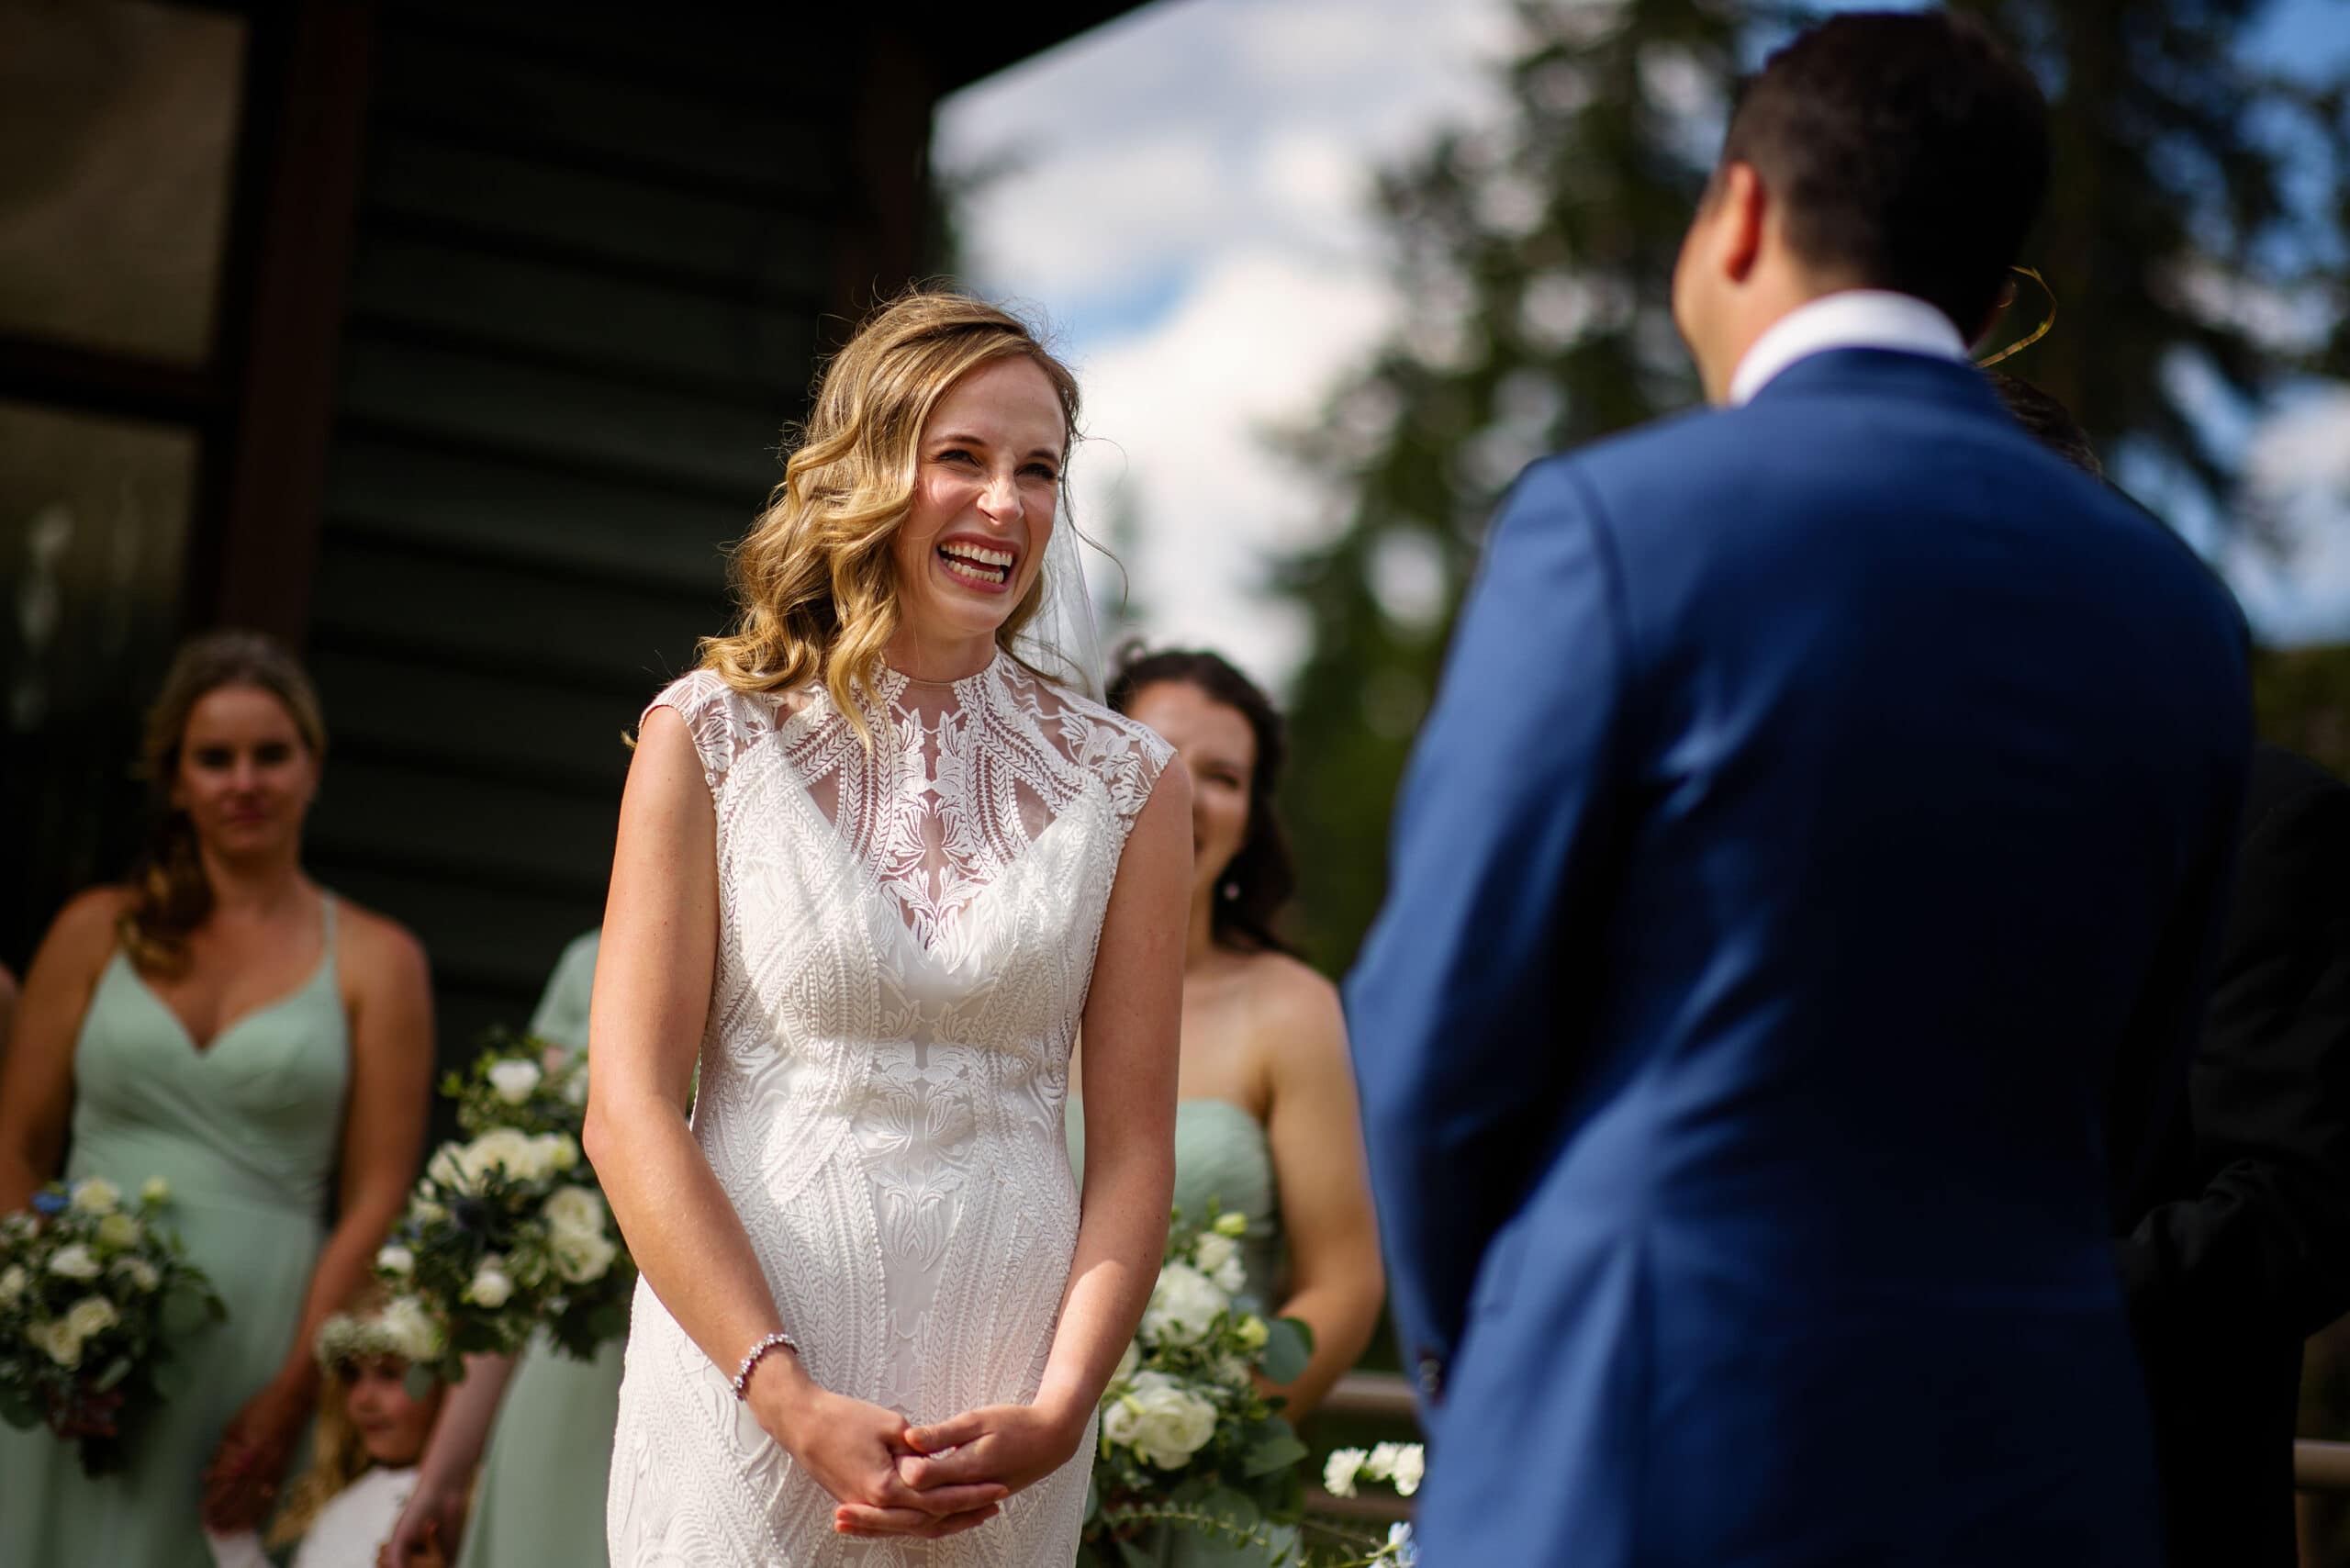 The bride laughs with the groom during the ceremony